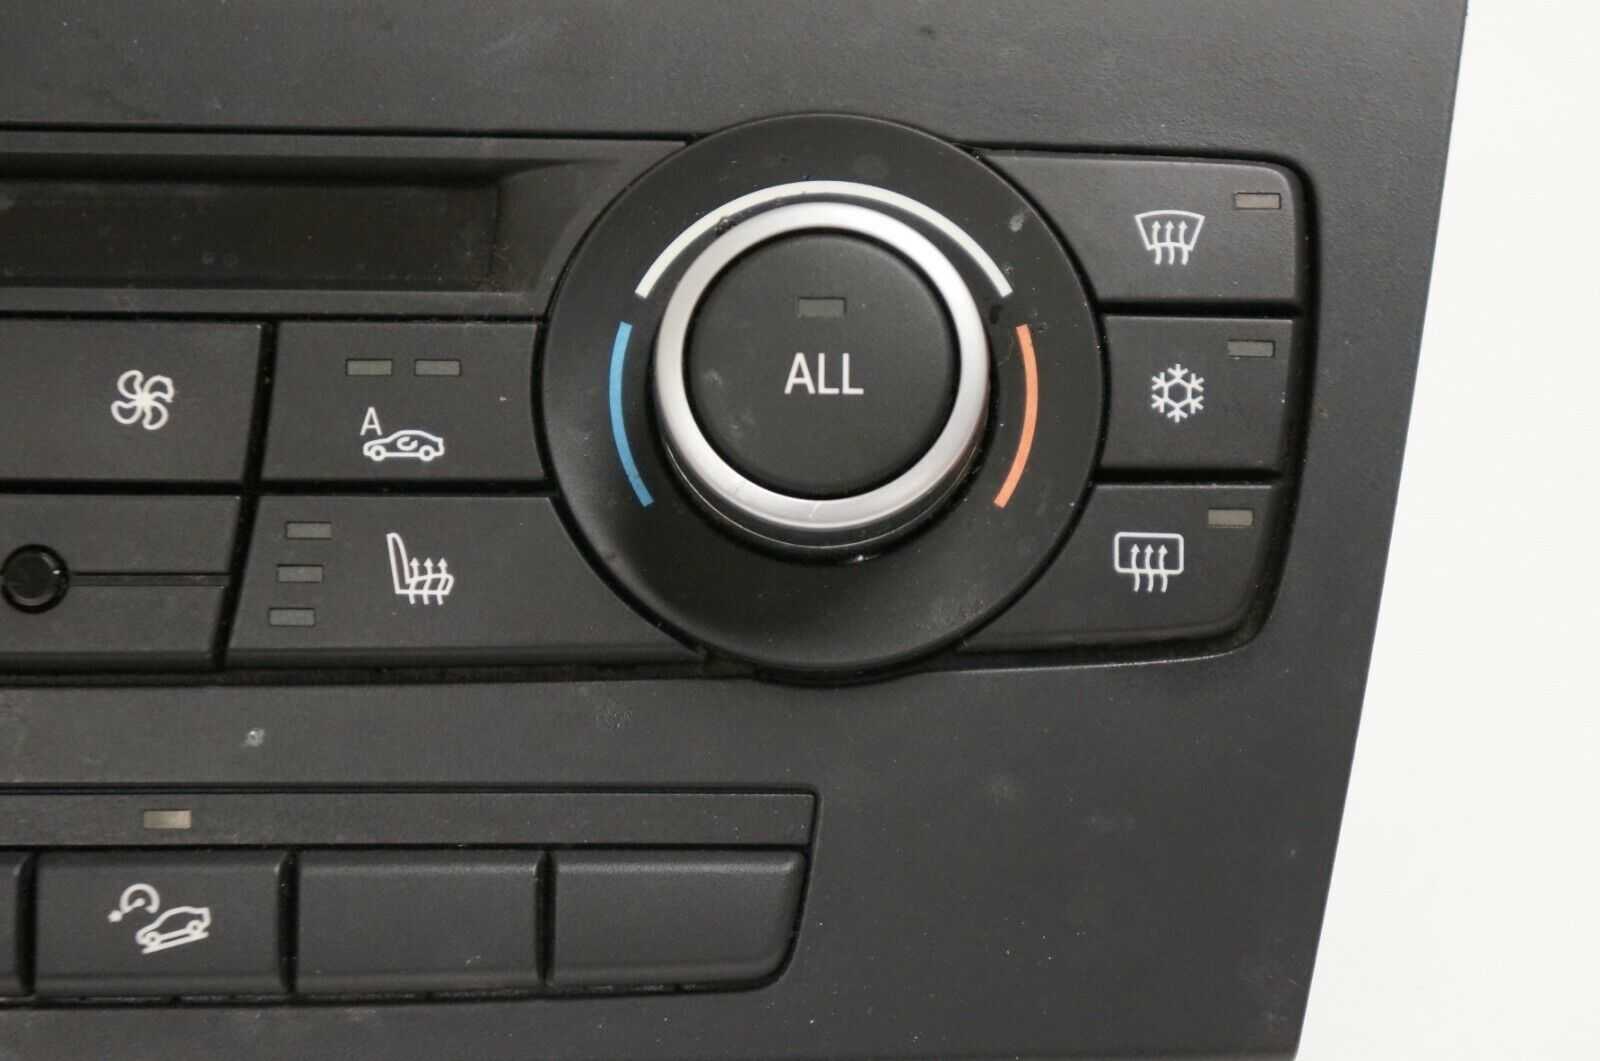 10-12 BMW 328 335 128 Auto Climate Control w/ Heated Seats OEM 6411 9221852-05 Alshned Auto Parts